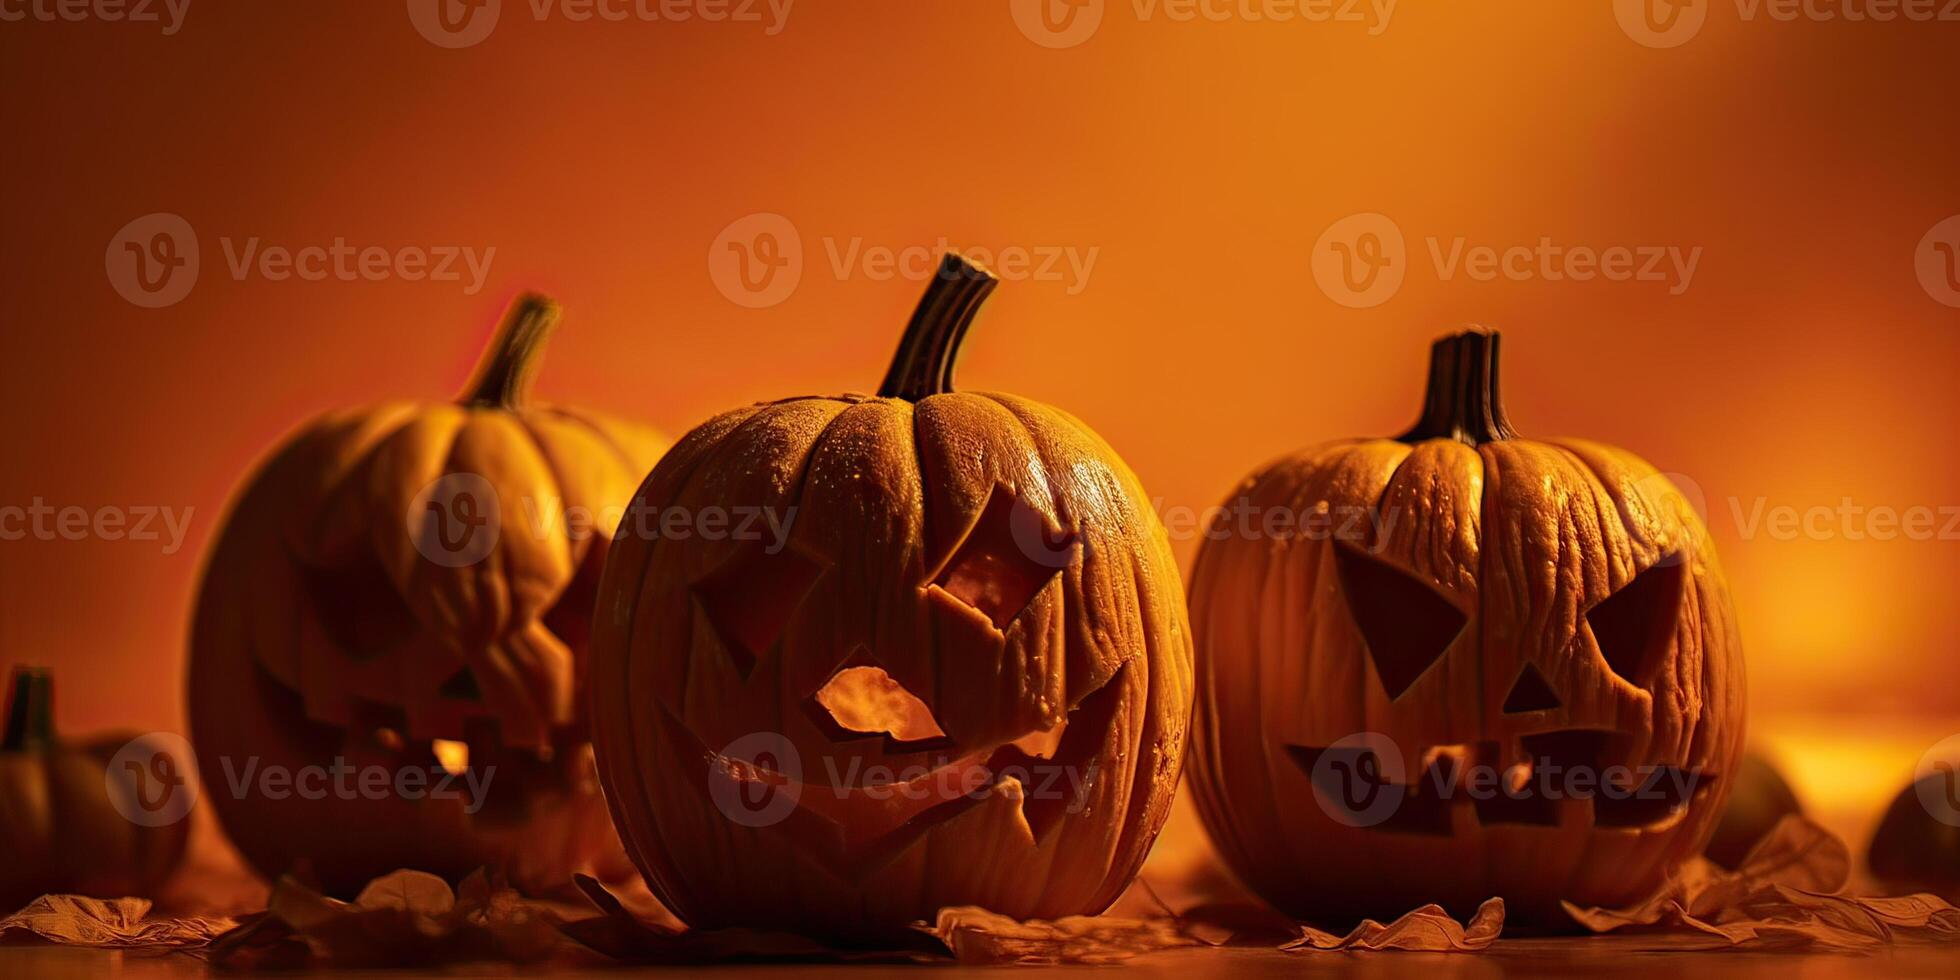 Scary pumpkin jack-o-lantern with creepy toothy smile and fiery glow inside realistic illustration. Traditional decoration, symbol of halloween holiday celebration. . photo